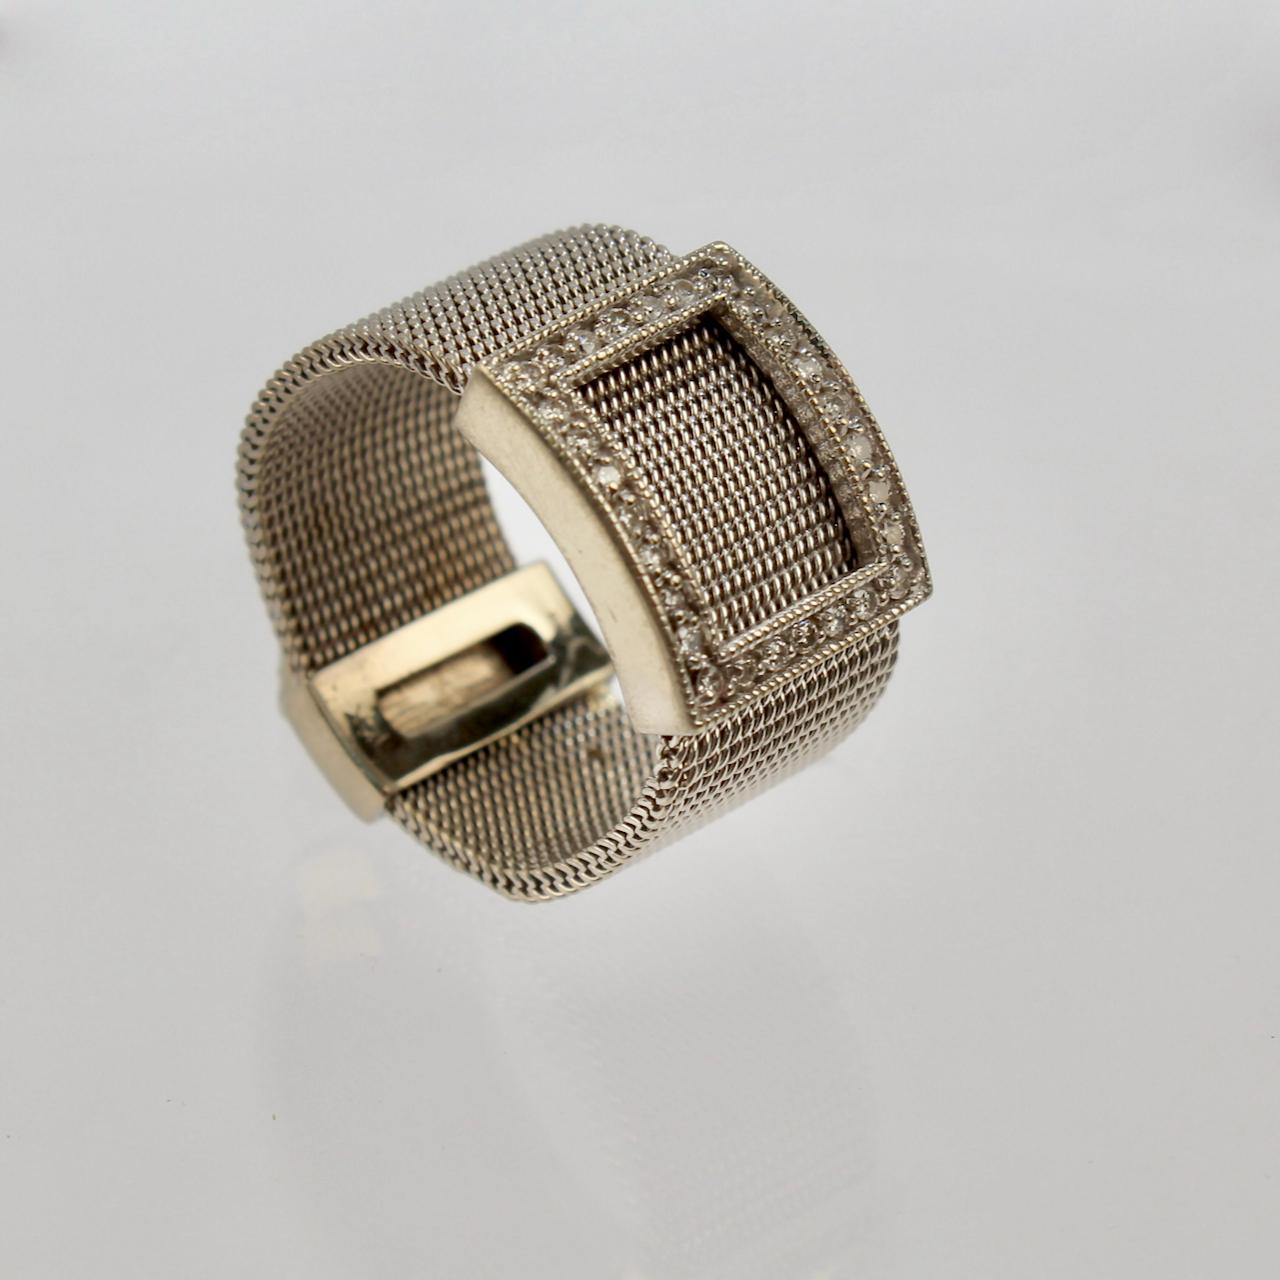 A very fine Deco style EFFY Bita 14k gold and diamond ring.

With a mesh band and diamond set 'buckle' to the top.

Simply a great ring!

Date:
20th Century

Overall Condition:
It is in overall good, as-pictured, used estate condition with some very